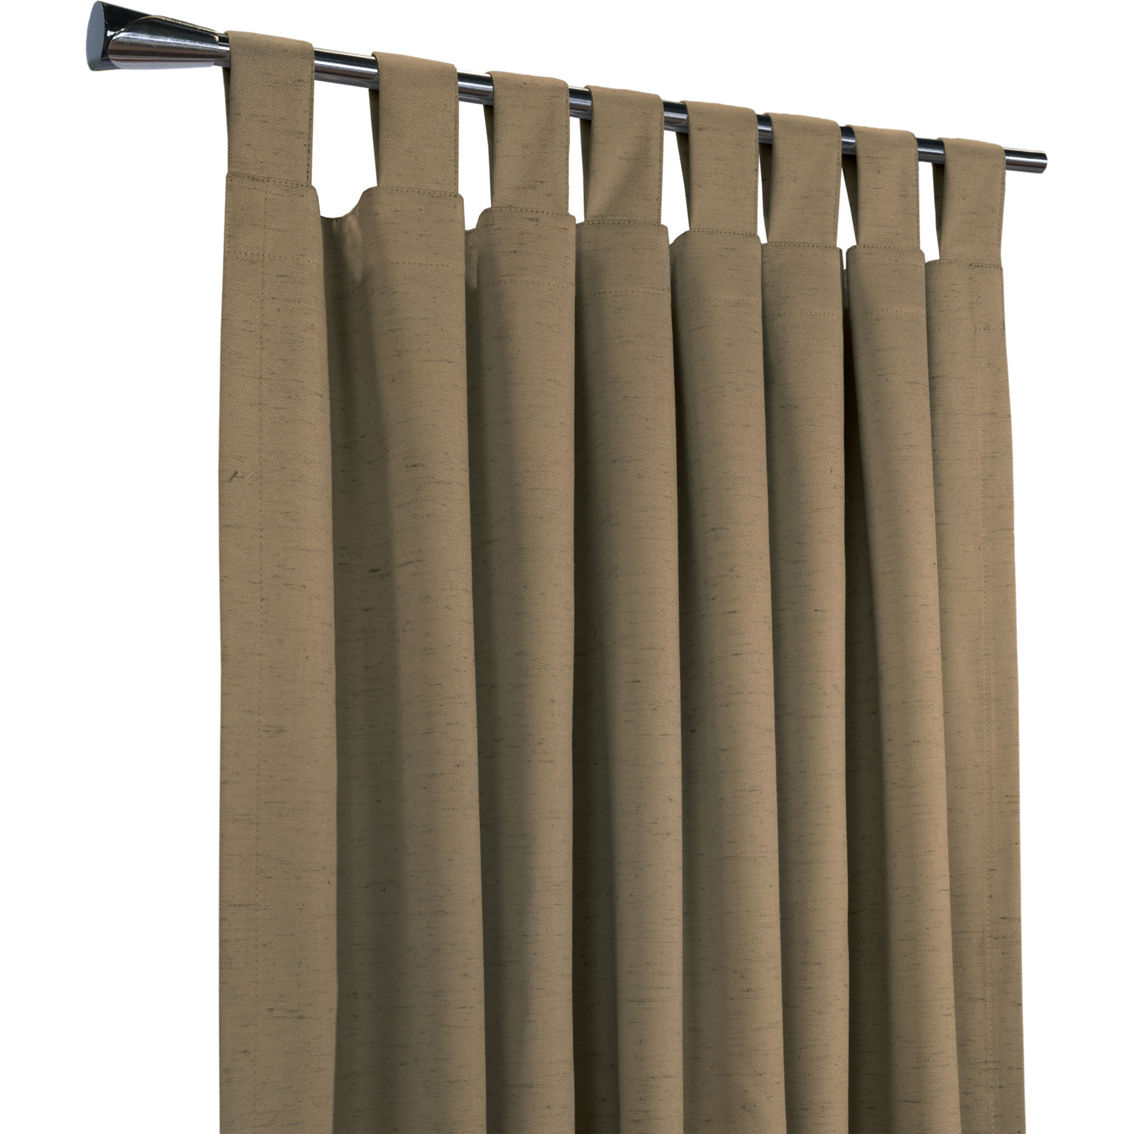 Commonwealth Home Fashions Ventura Blackout Tab Top 52 x 95 in. Curtain Panel Pair - Image 3 of 6